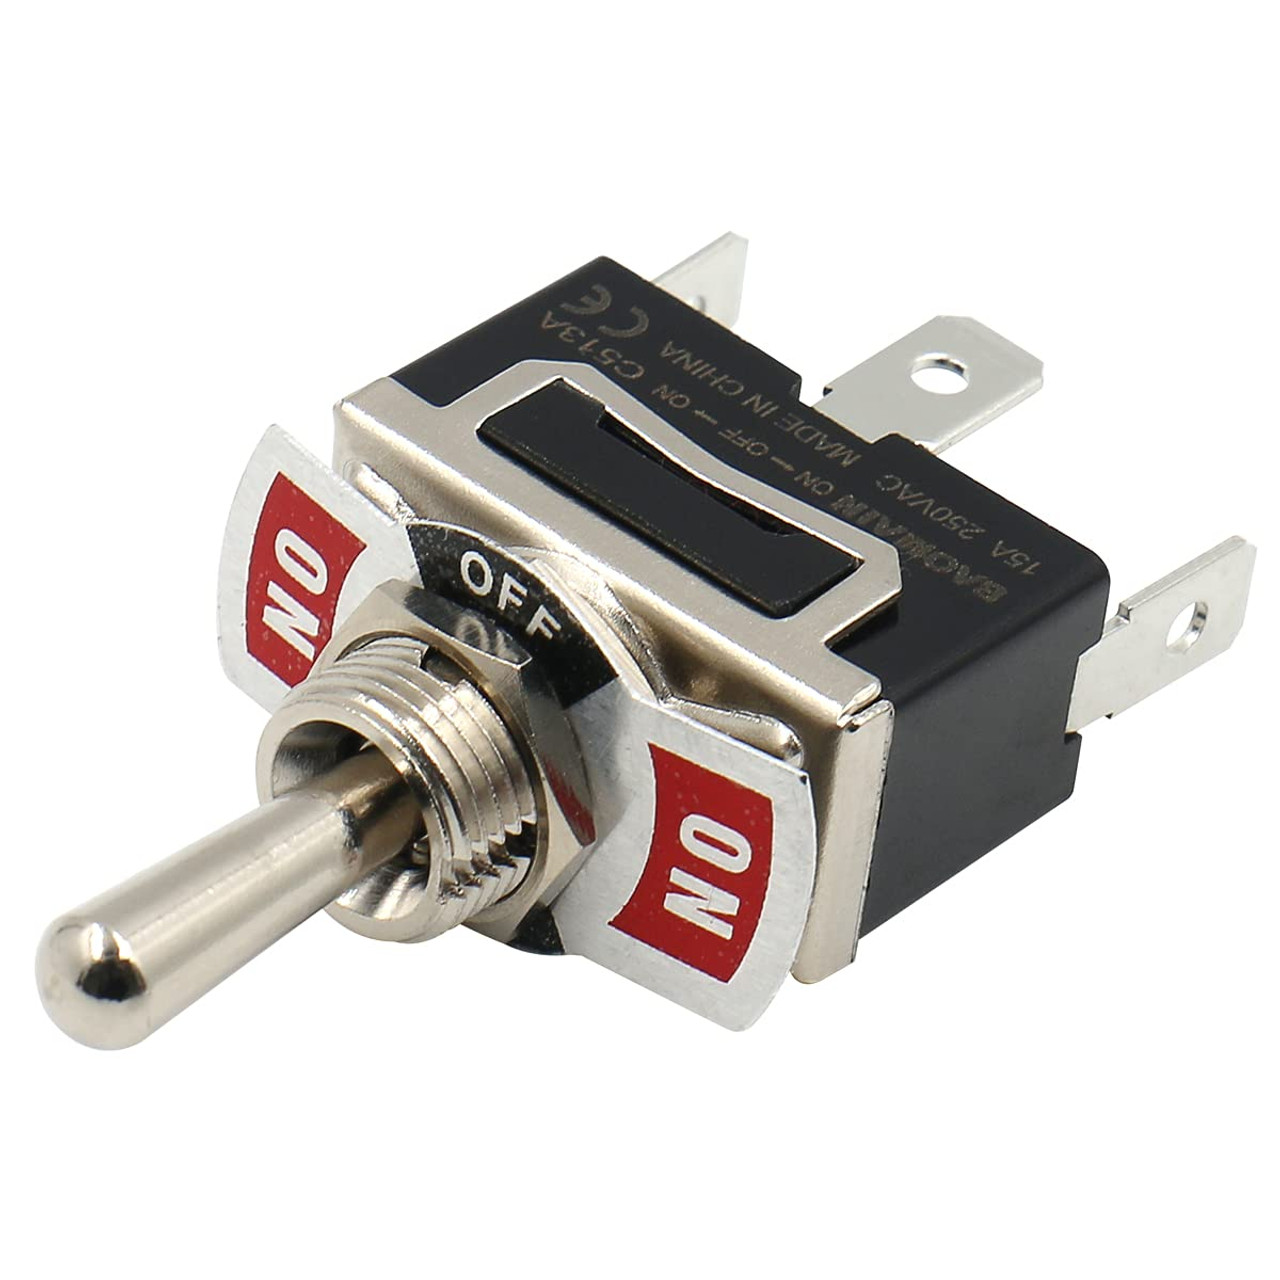 Toggle Switch SPDT ON/Off/ON 3 Position 250VAC 15A 1/2" mounting Hole Tab Terminal 1/4" Width